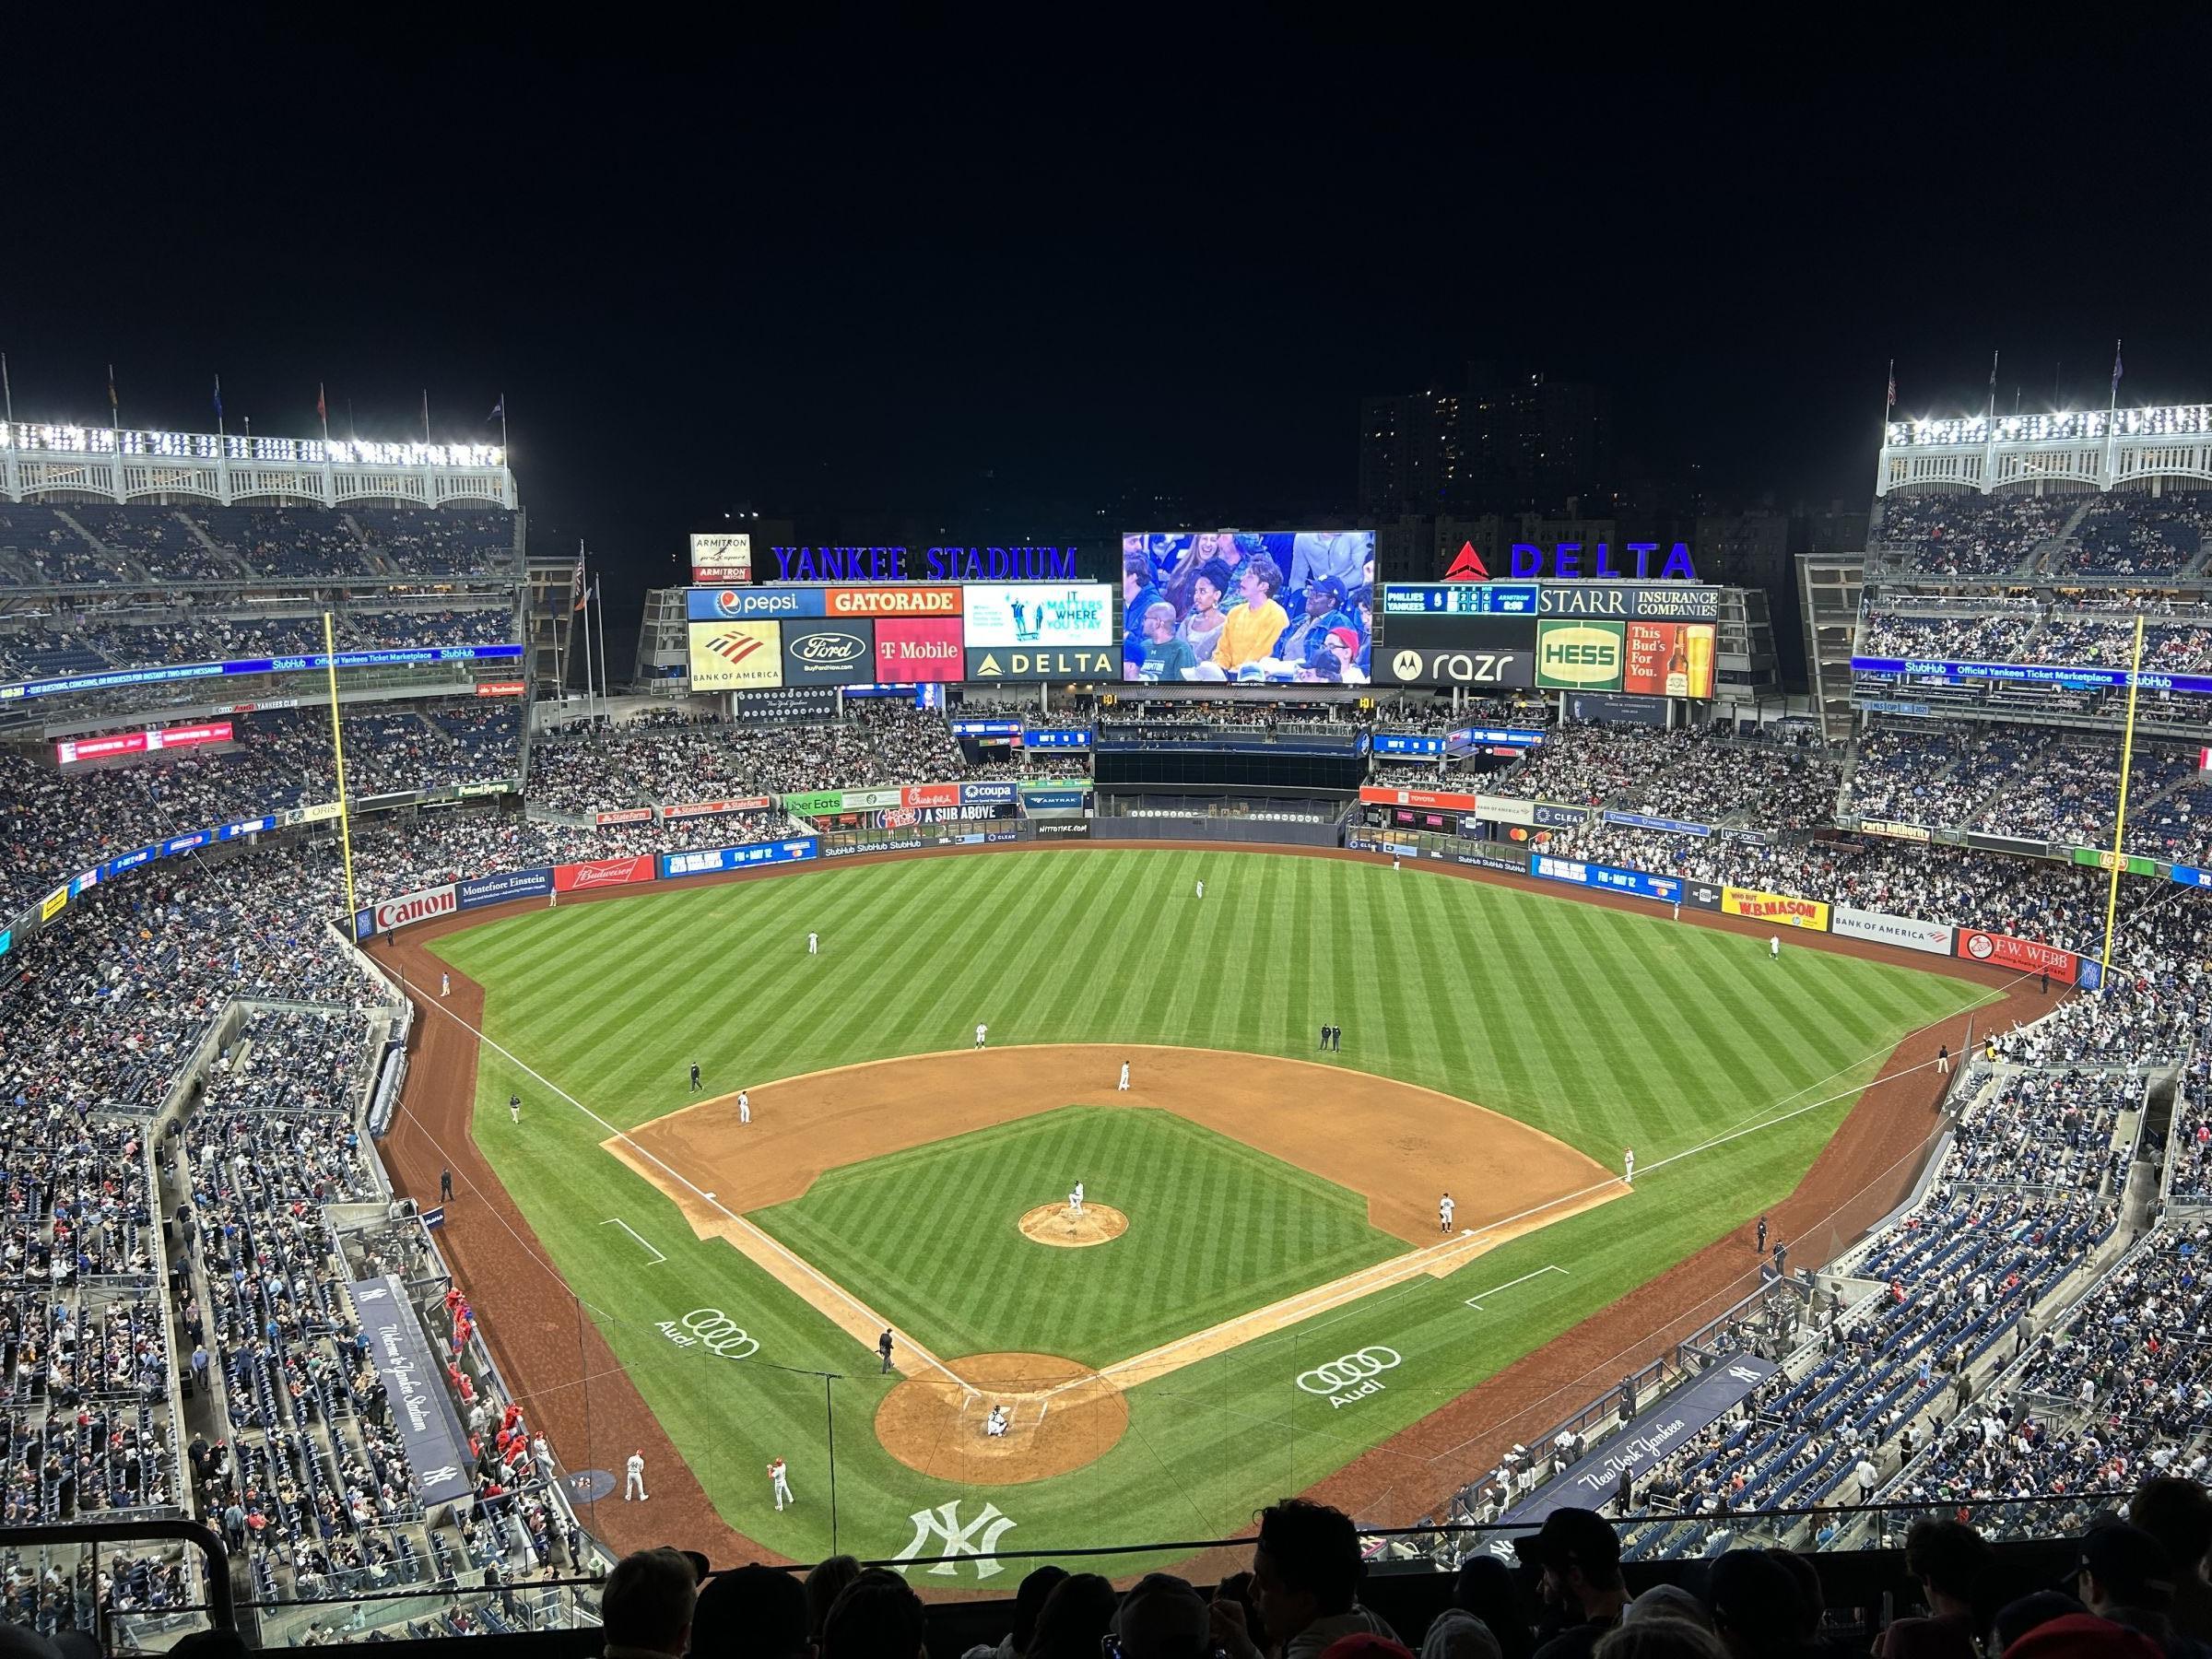 section 420a, row 7 seat view  for baseball - yankee stadium